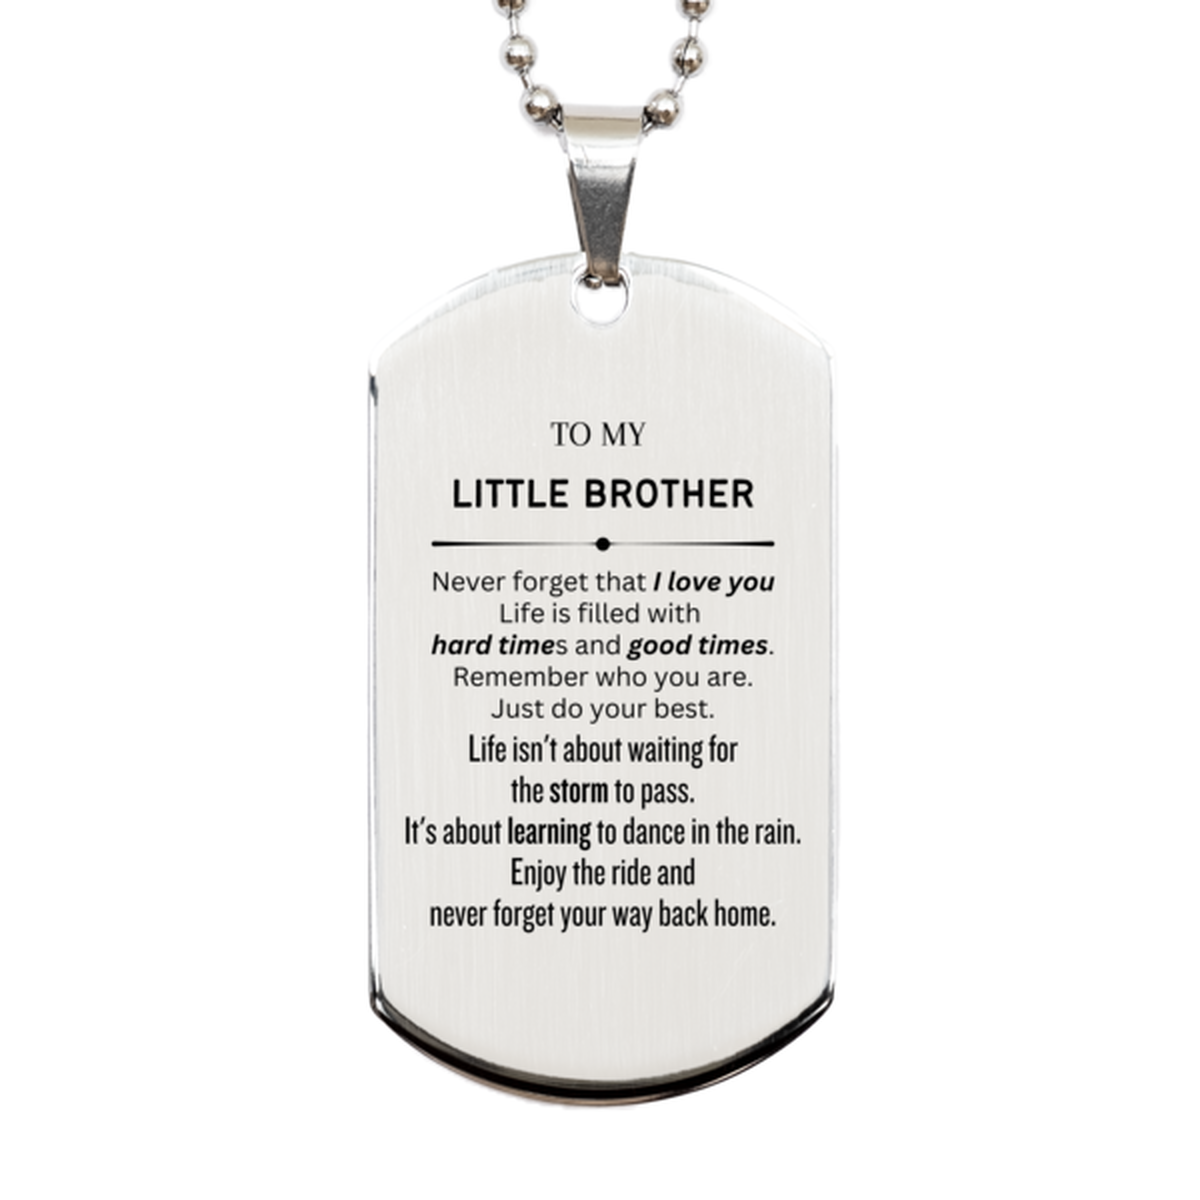 Christmas Little Brother Silver Dog Tag Gifts, To My Little Brother Birthday Thank You Gifts For Little Brother, Graduation Unique Gifts For Little Brother To My Little Brother Never forget that I love you life is filled with hard times and good times. Re